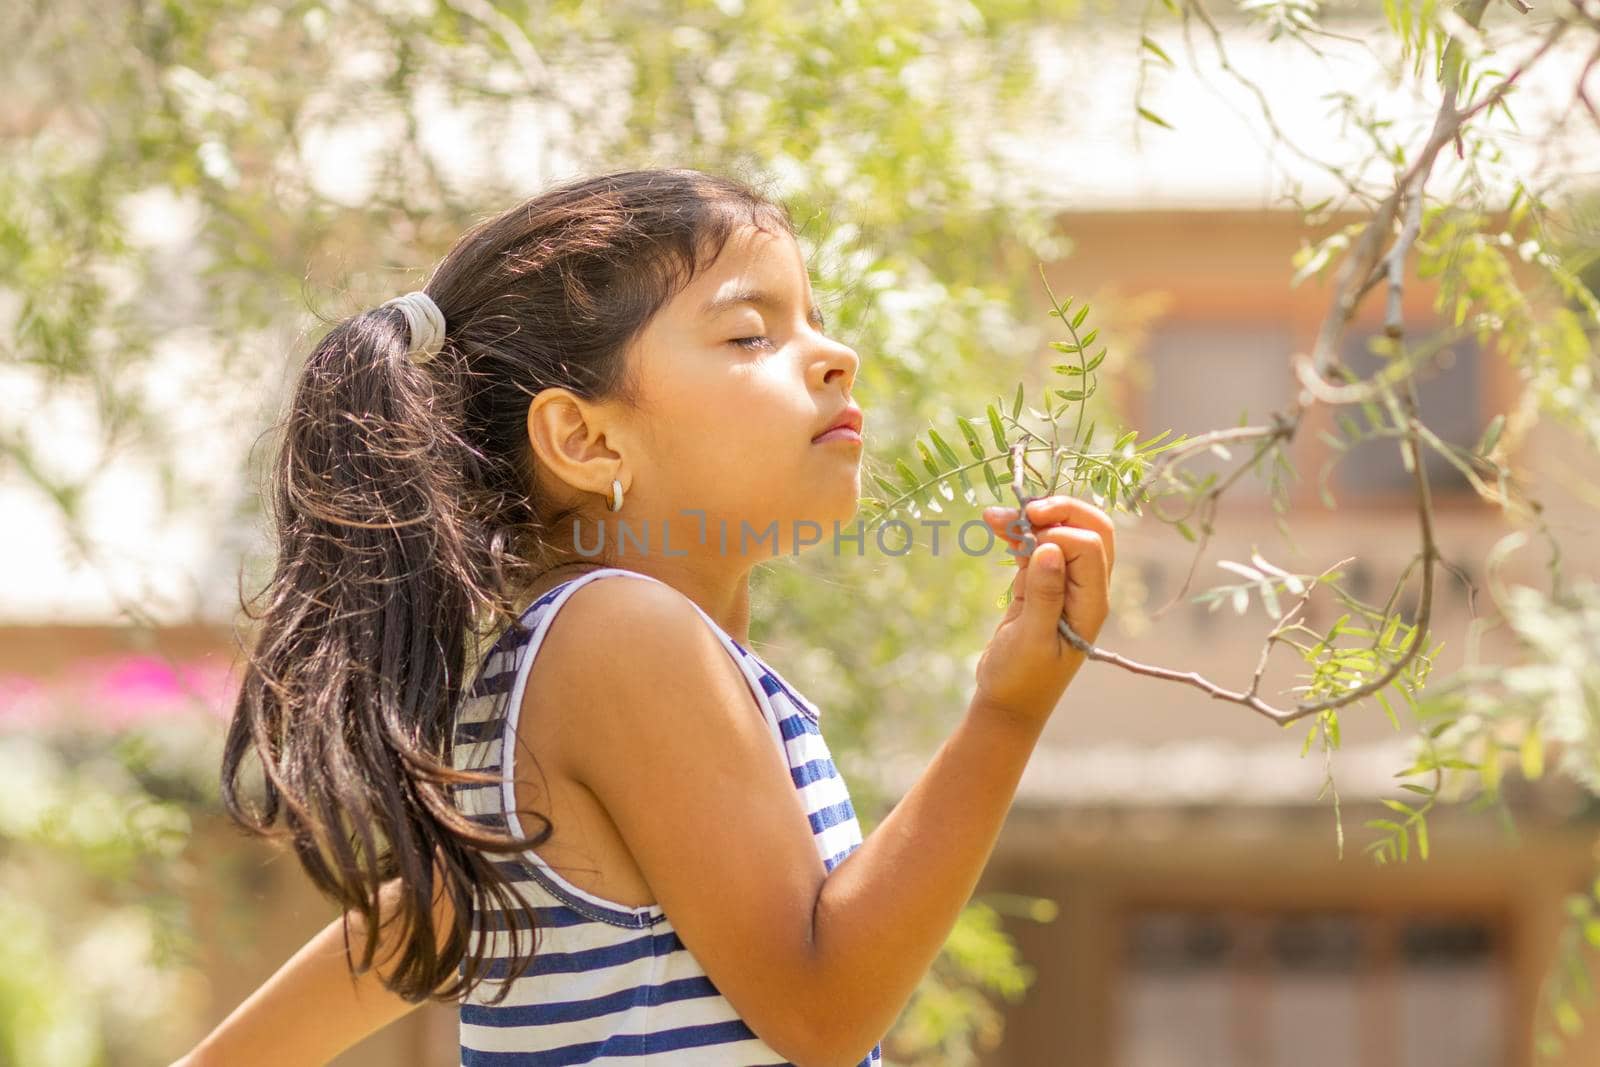 Little girl enjoying the smell of plants in nature by eagg13